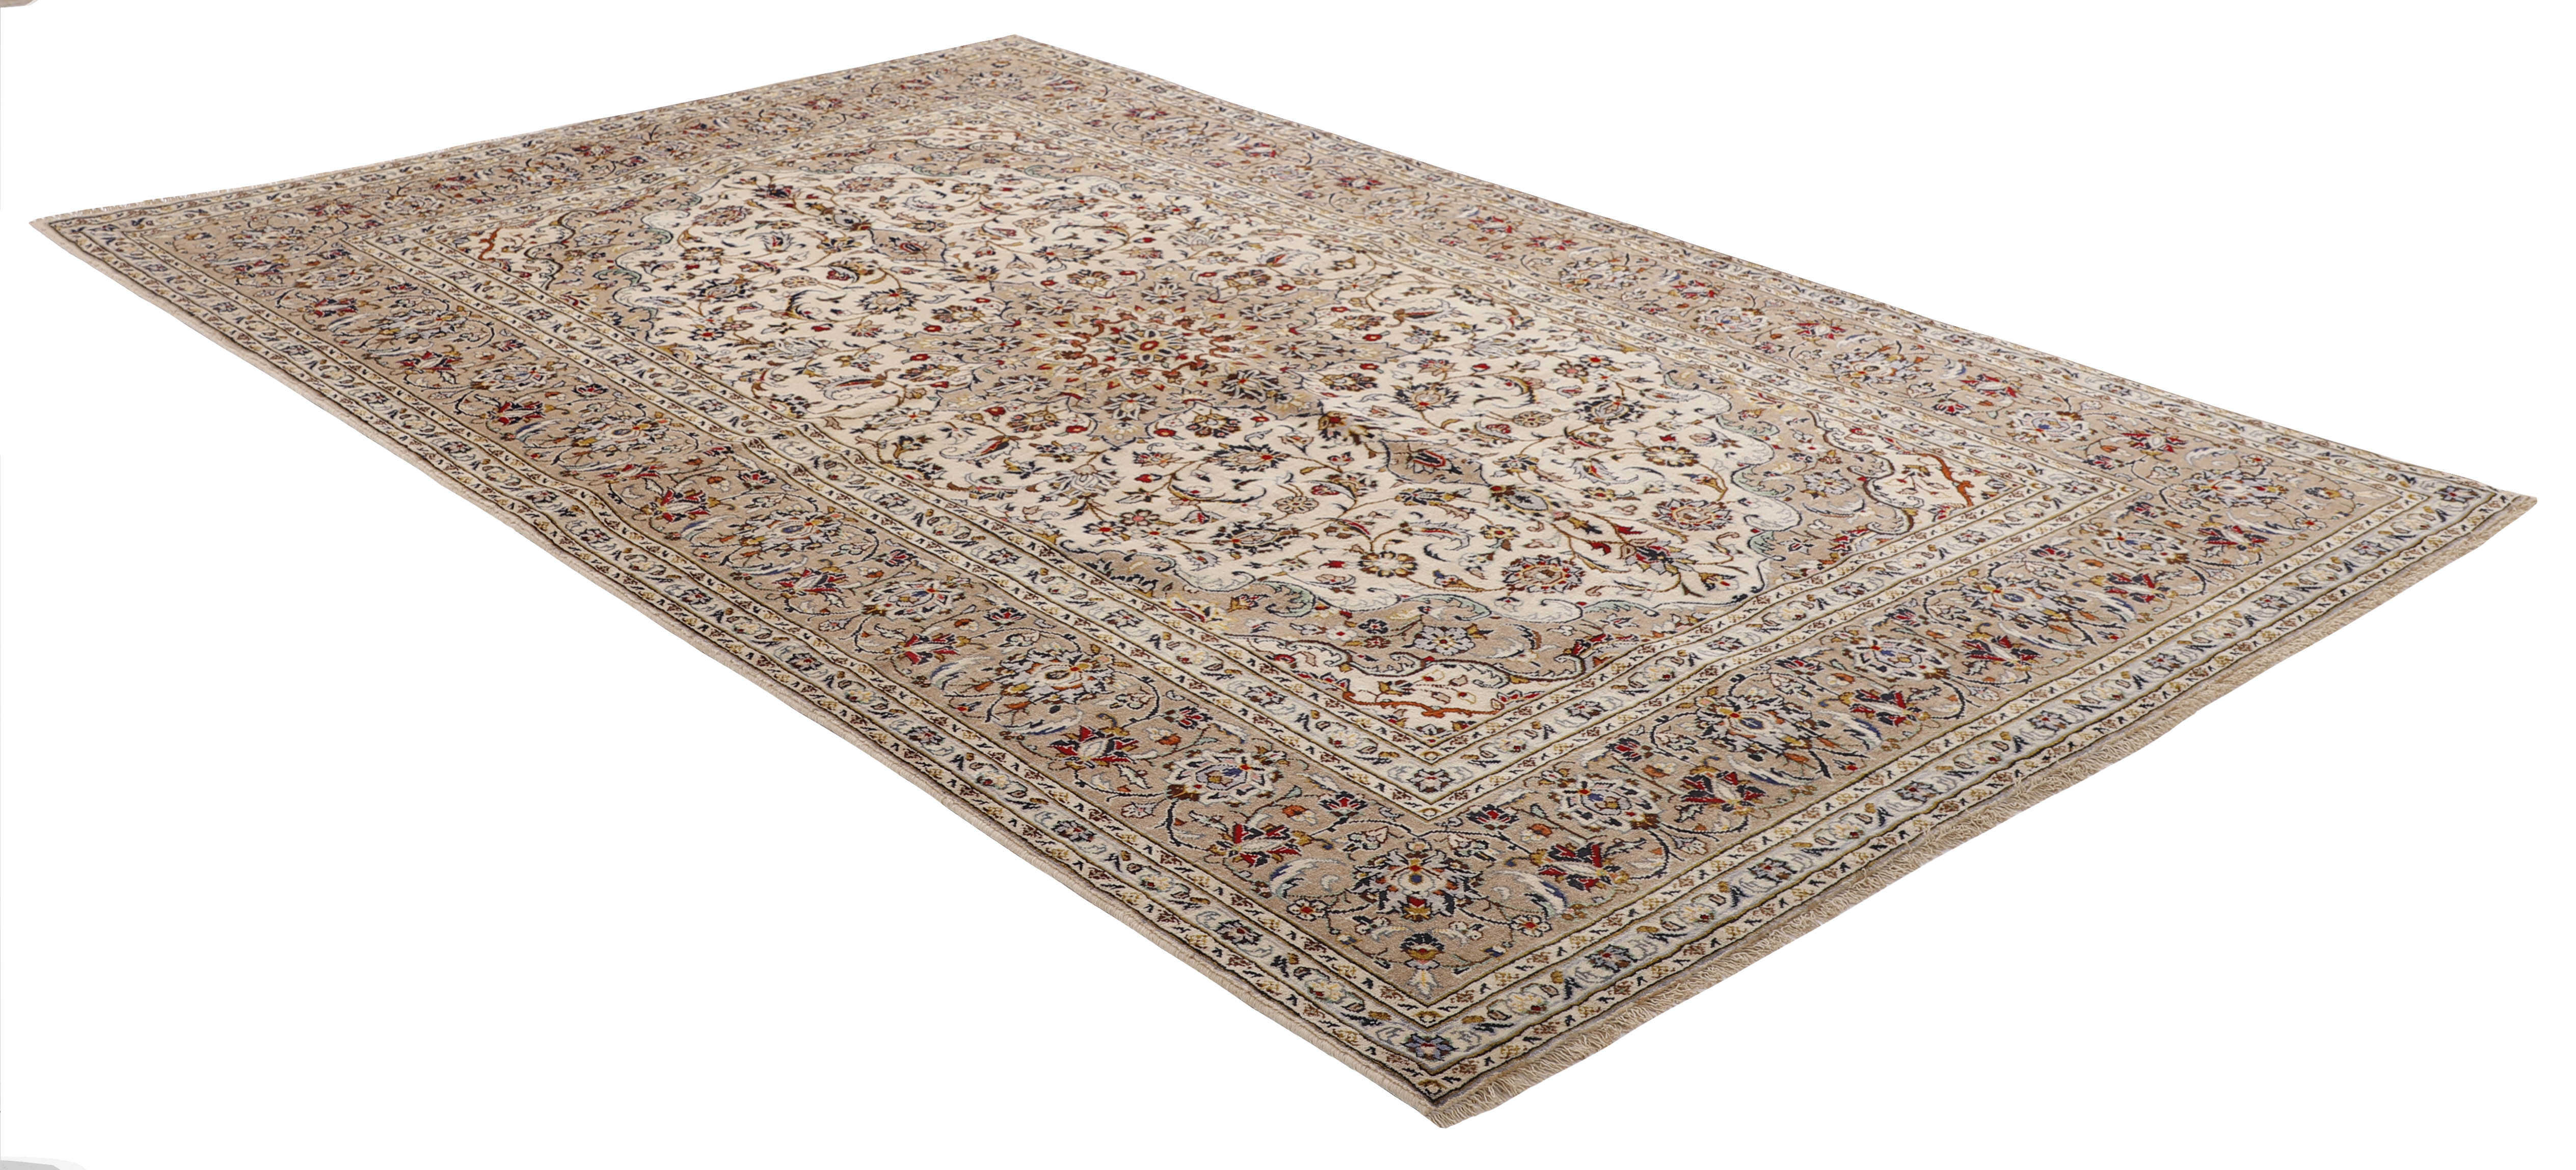 Authentic persian rug with traditional floral design in multicolour